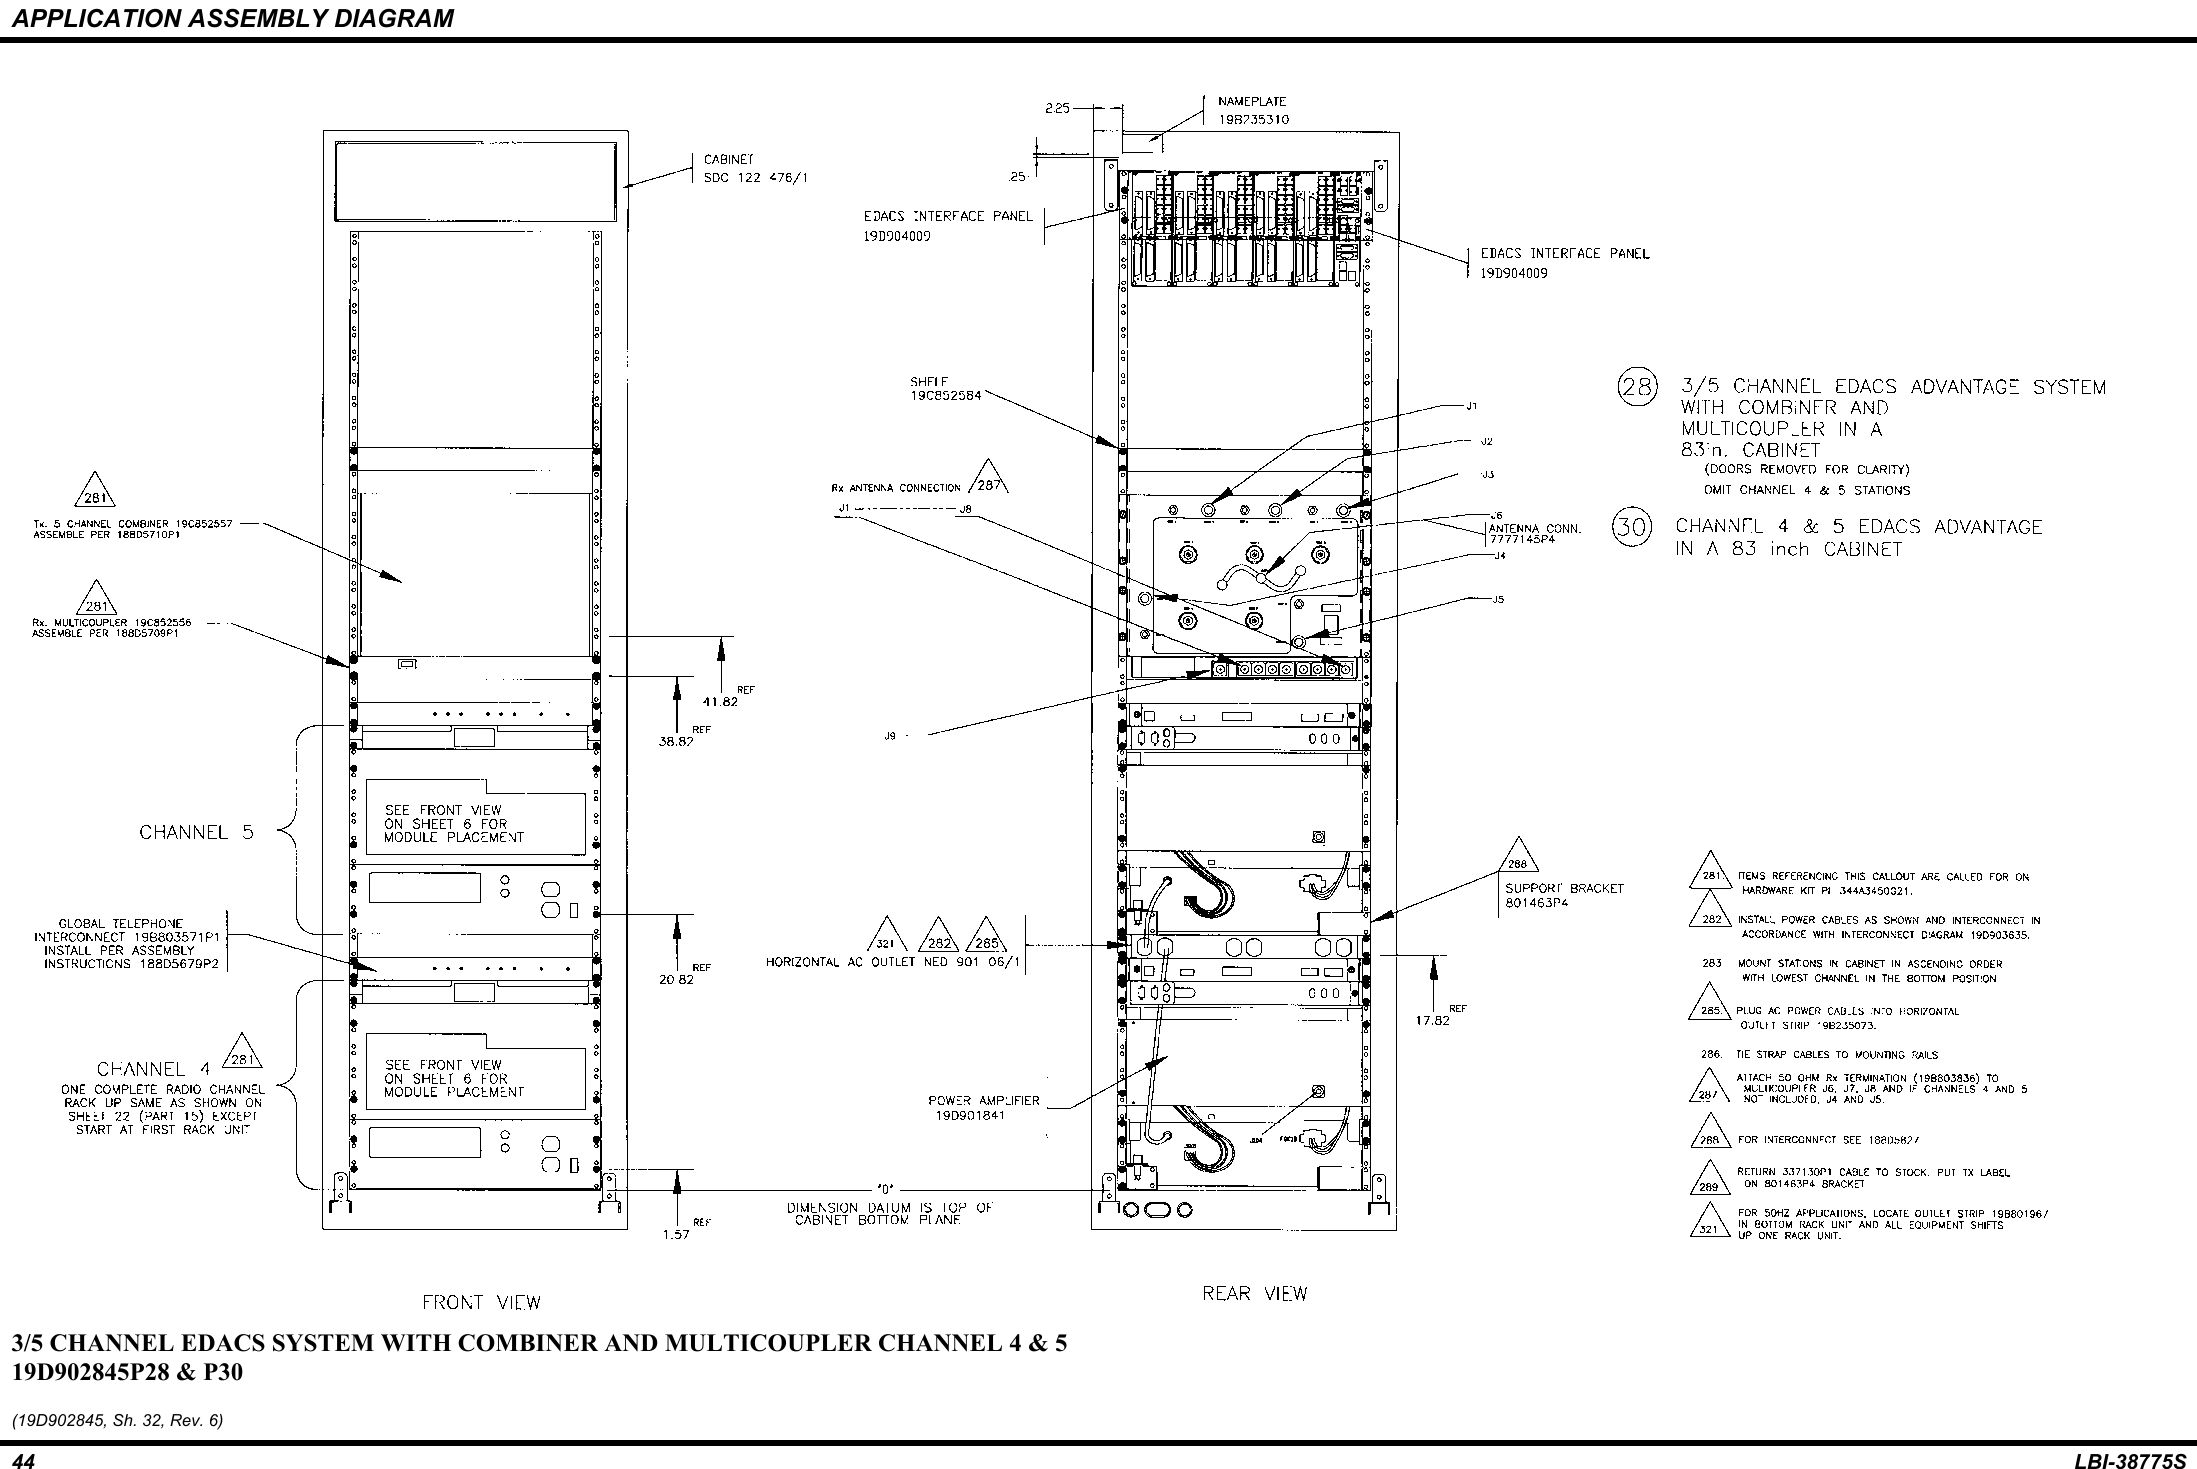 APPLICATION ASSEMBLY DIAGRAM44 LBI-38775S3/5 CHANNEL EDACS SYSTEM WITH COMBINER AND MULTICOUPLER CHANNEL 4 &amp; 519D902845P28 &amp; P30(19D902845, Sh. 32, Rev. 6)